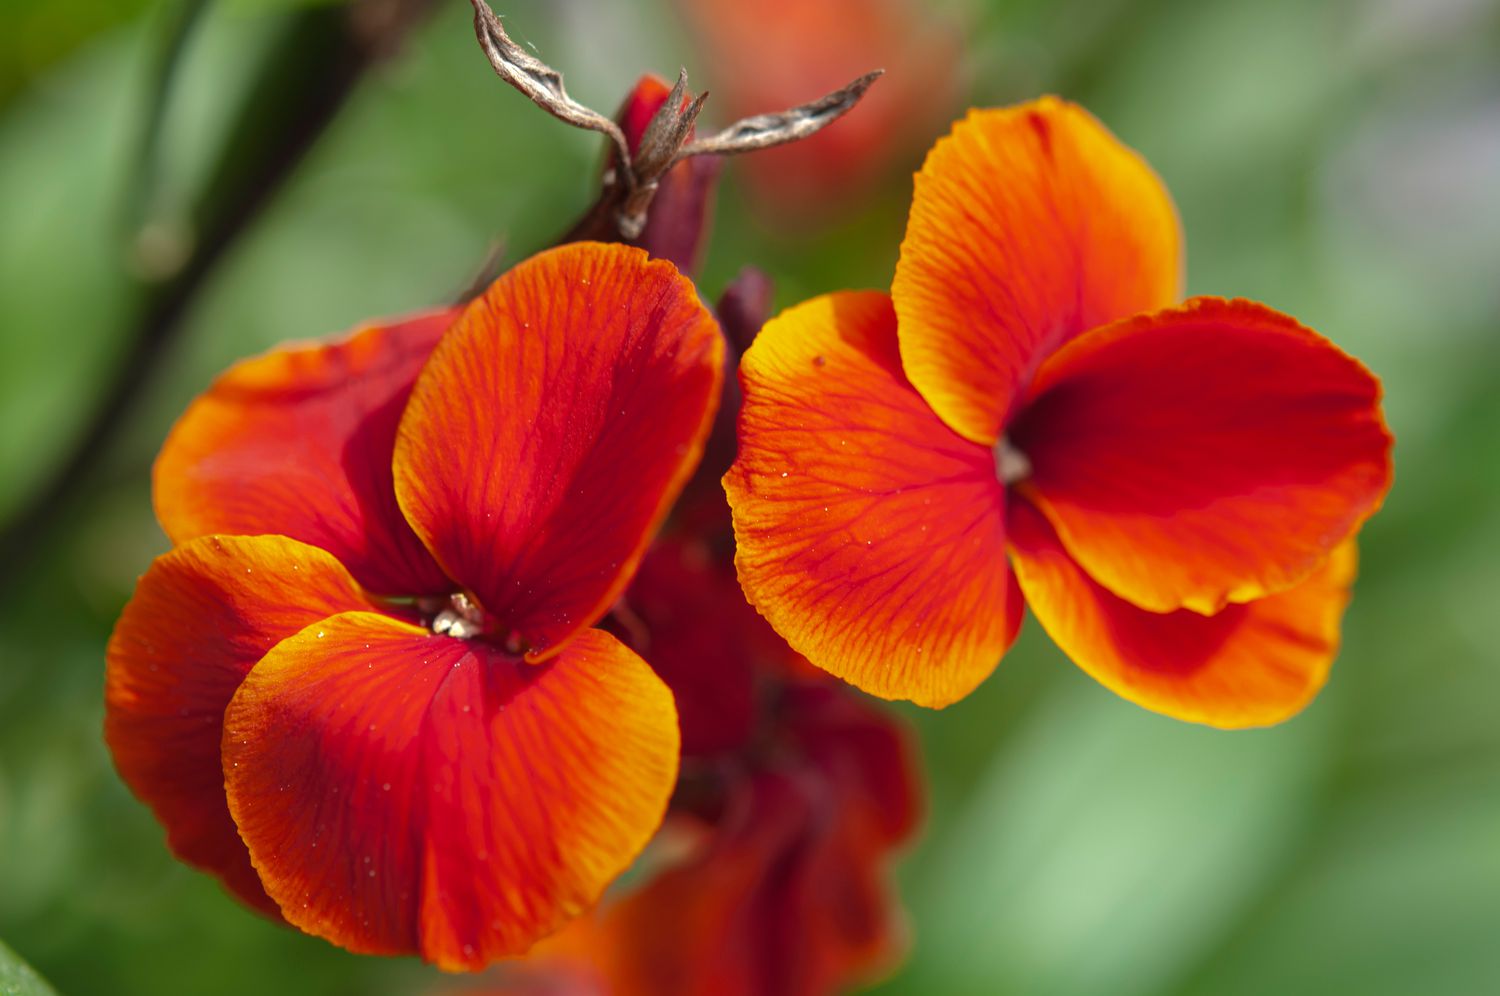 Fire king wallflower plant with red-orange flowers closeup